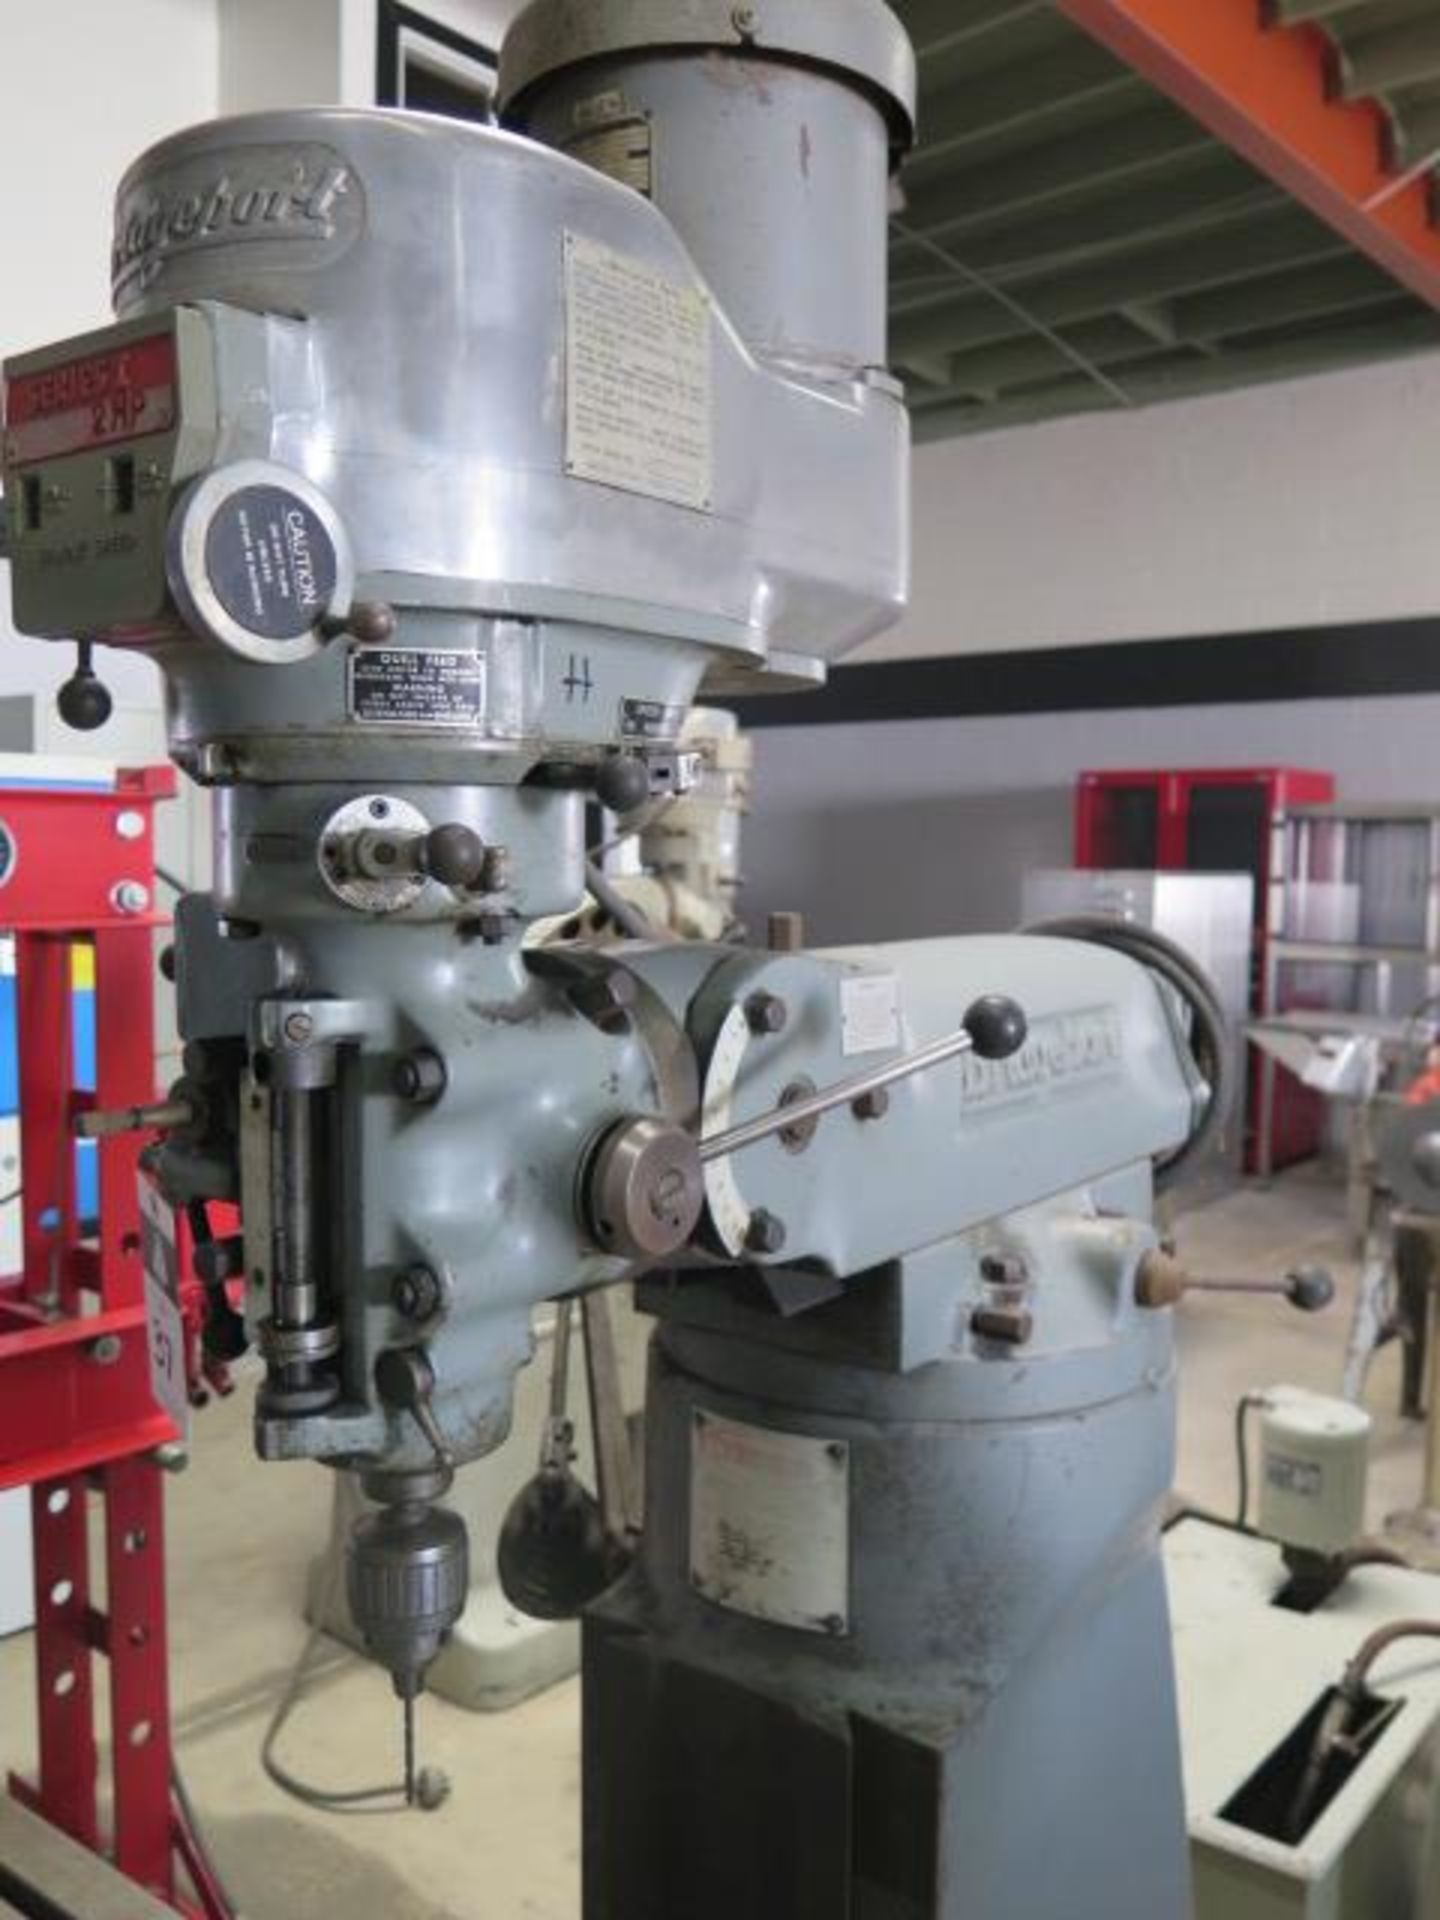 Bridgeport Serries 1 – 2Hp Vertical Mill w/ 60-4200 RPM, Chrome Ways, 9” x 42” Table, SOLD AS IS - Image 4 of 10